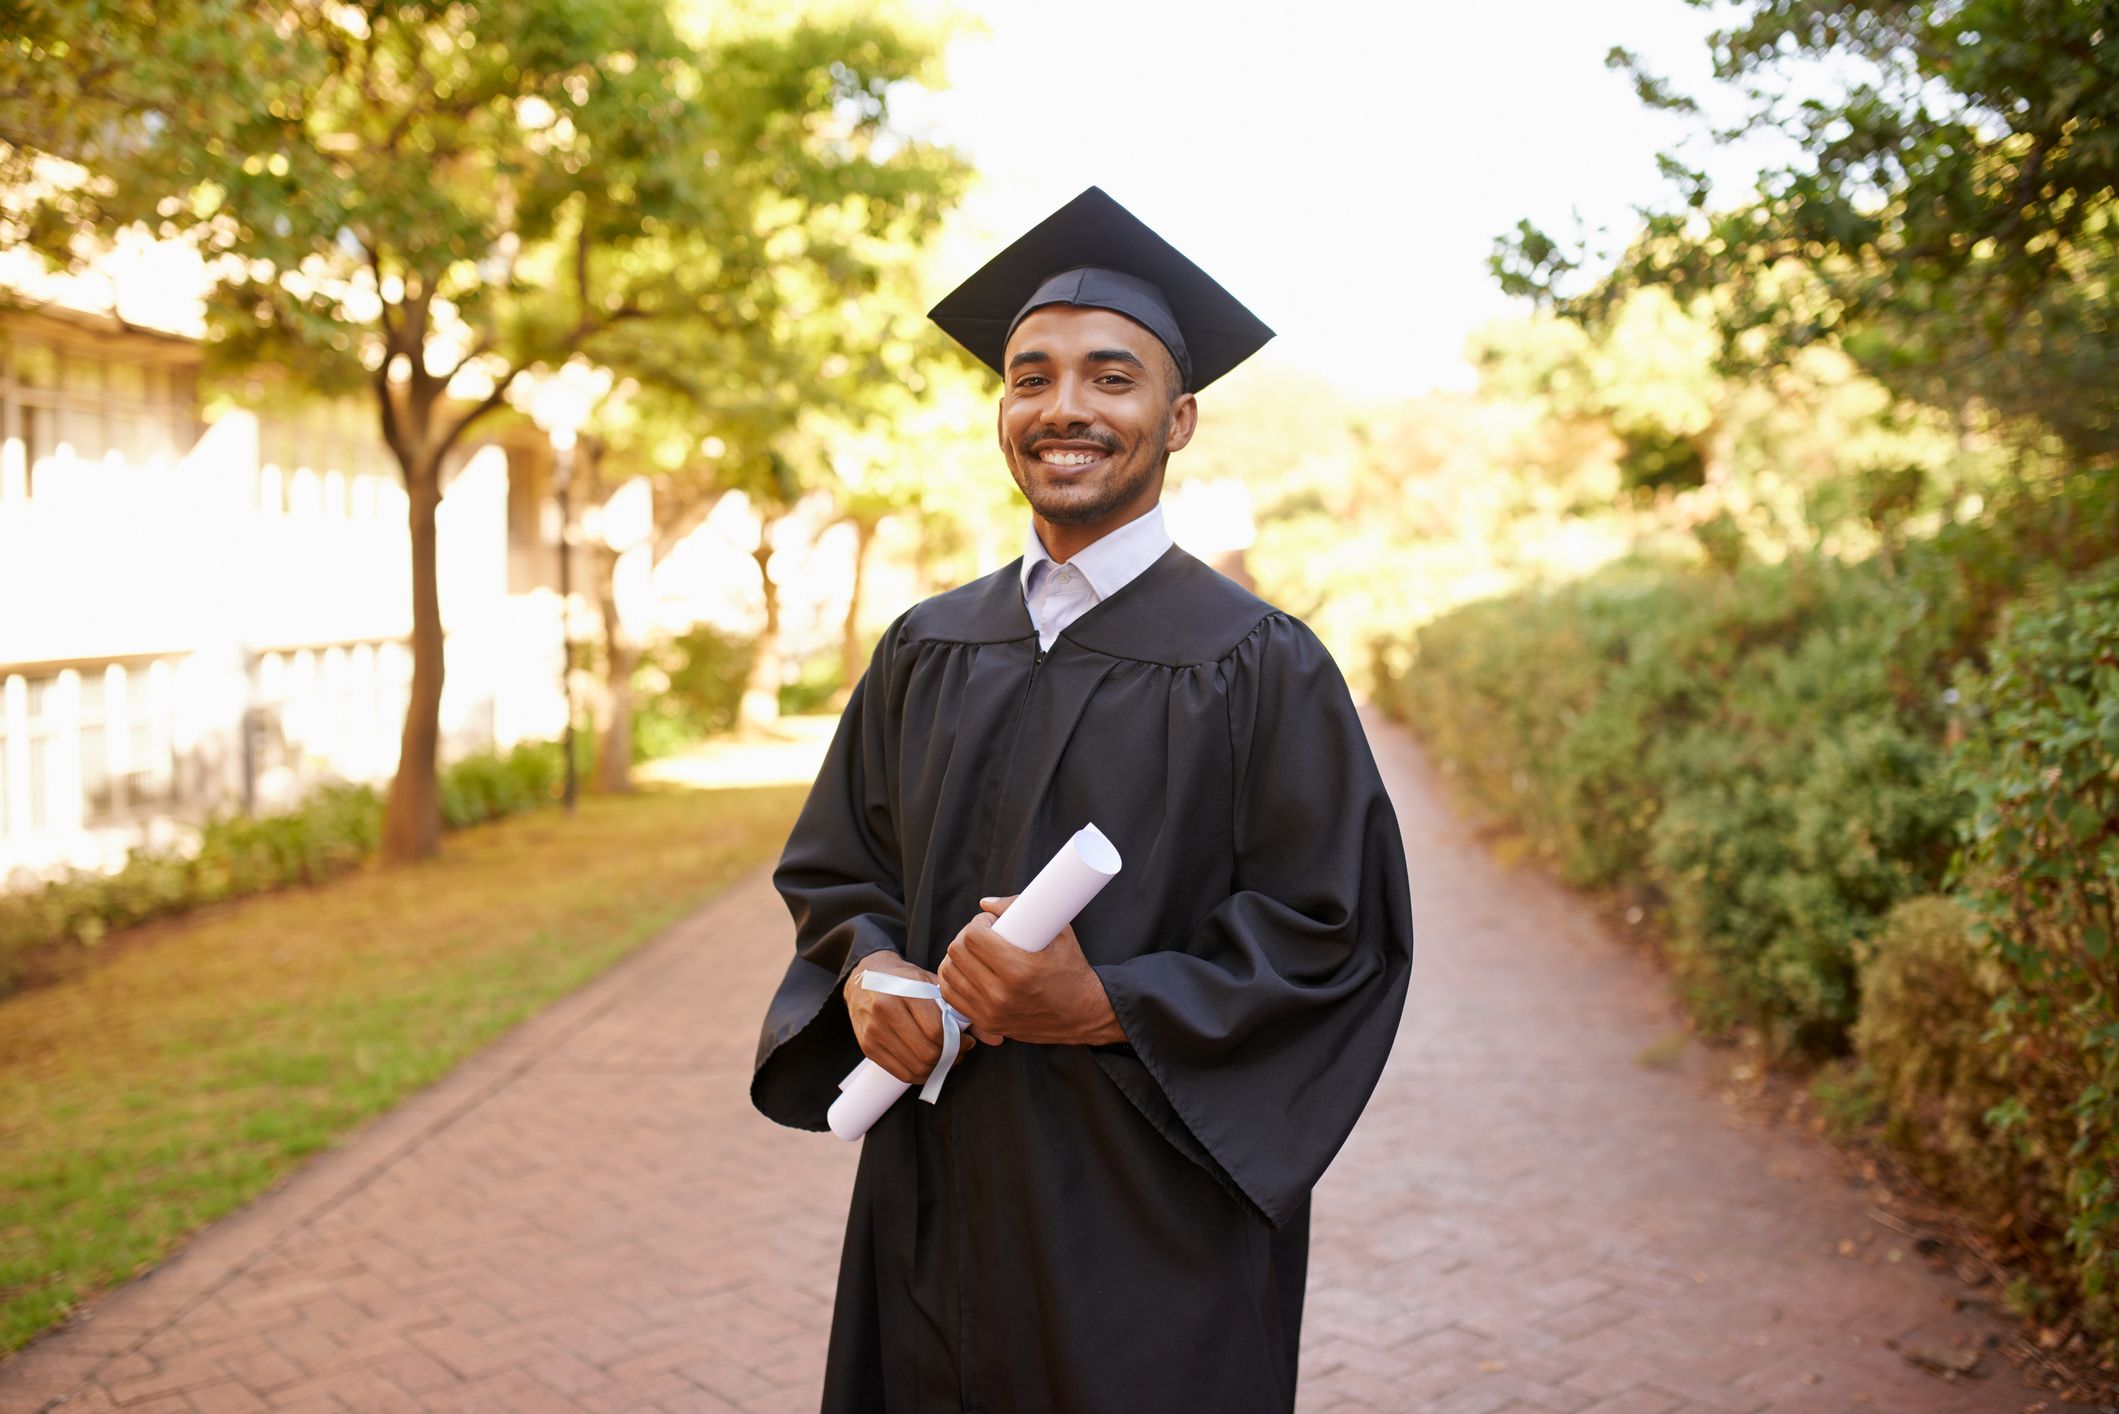 10 Tips and Ideas for Graduation Photos in 2022